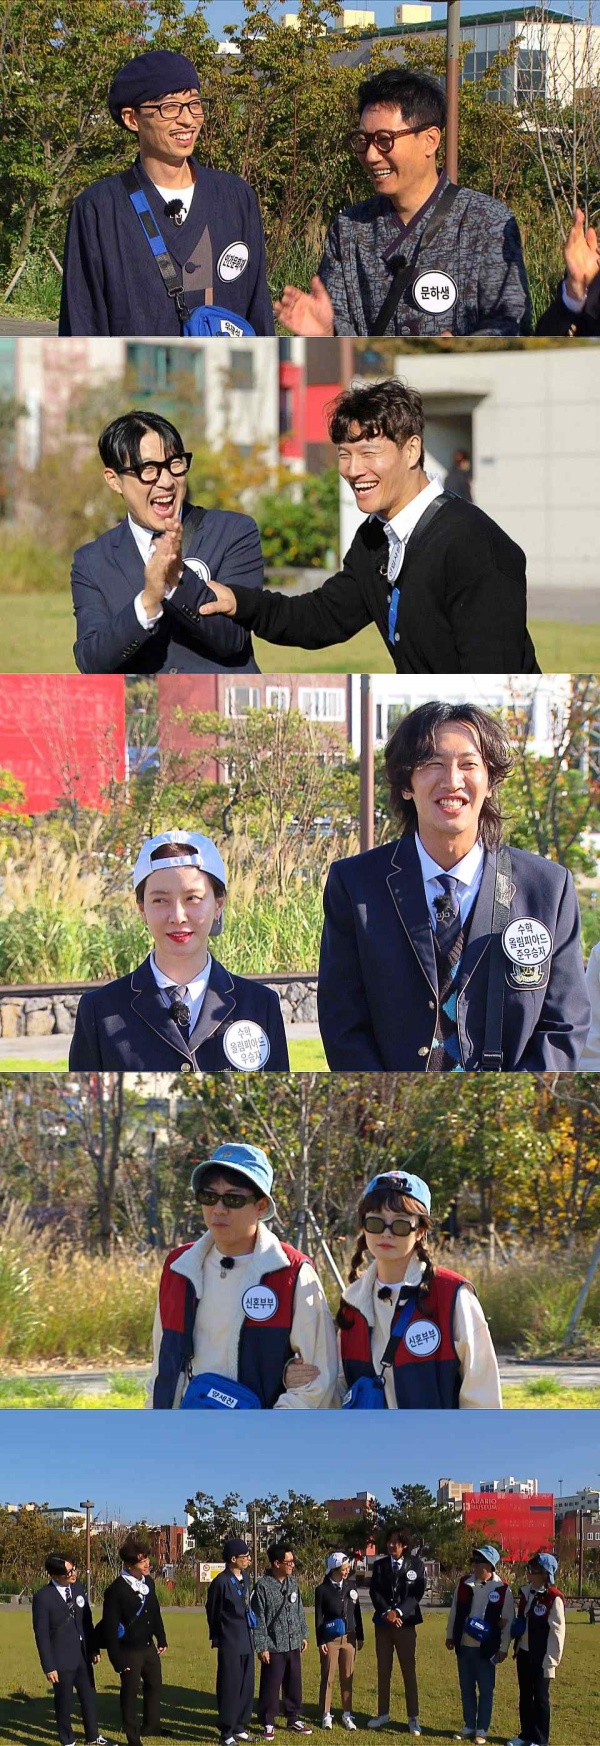 The previous-class situation drama of Running Man members who left Jeju Island package Travel in Running Man will be unfolded.Earlier, SBS entertainment program Running Man made a big headline, including setting a frame through Chuseok special feature The Yujian Heritage War, which was broadcast in October, and climbing to the top of video streaming sites and major portal clip views immediately after the broadcast with the Chemi Explosion situation drama.This weeks broadcast predicted the birth of another legend situation drama with the concept of A variety of 4 couples leaving the package Travel to Jeju Island.In recent recordings, the priest Chemie of Human Cultural, Yoo Jae-Suk, and Ji Suk-jin, a unidentified human cultural student, Kim Jong-kook, and Haha, a deputy to Super Rookie, and Y. From theang Se-chan and Jeon So-min, the Mathematics Olympiad winner Song Ji-hyo and the runner-up Lee Kwang-soo, the character with full personality and the chemistry with the mate caught the eye.They enjoyed a great trip to the scenery and sightseeing spots of Jeju Island, touring restaurants, taking pictures of life, but there was a tension in the pleasant Travel when the super-class reversal hidden in the package Travel was revealed.Also, the first special feature of Jeju Island, which was broadcast last week, produced a lot of topics as Lee Joo-bin and Han Ji-eun, who were invited as guests, came to the portal site search term. This week, which was held as the second special feature of Jeju Island, also introduced the beautiful scenery, attractions and food of Jeju Island along with the previous-class situation drama.The identity of the previous-class situation drama and the reverse package Travel, which show the 10-year breathing among the members, can be seen on Running Man, which will be broadcast at 5 pm on the 8th.